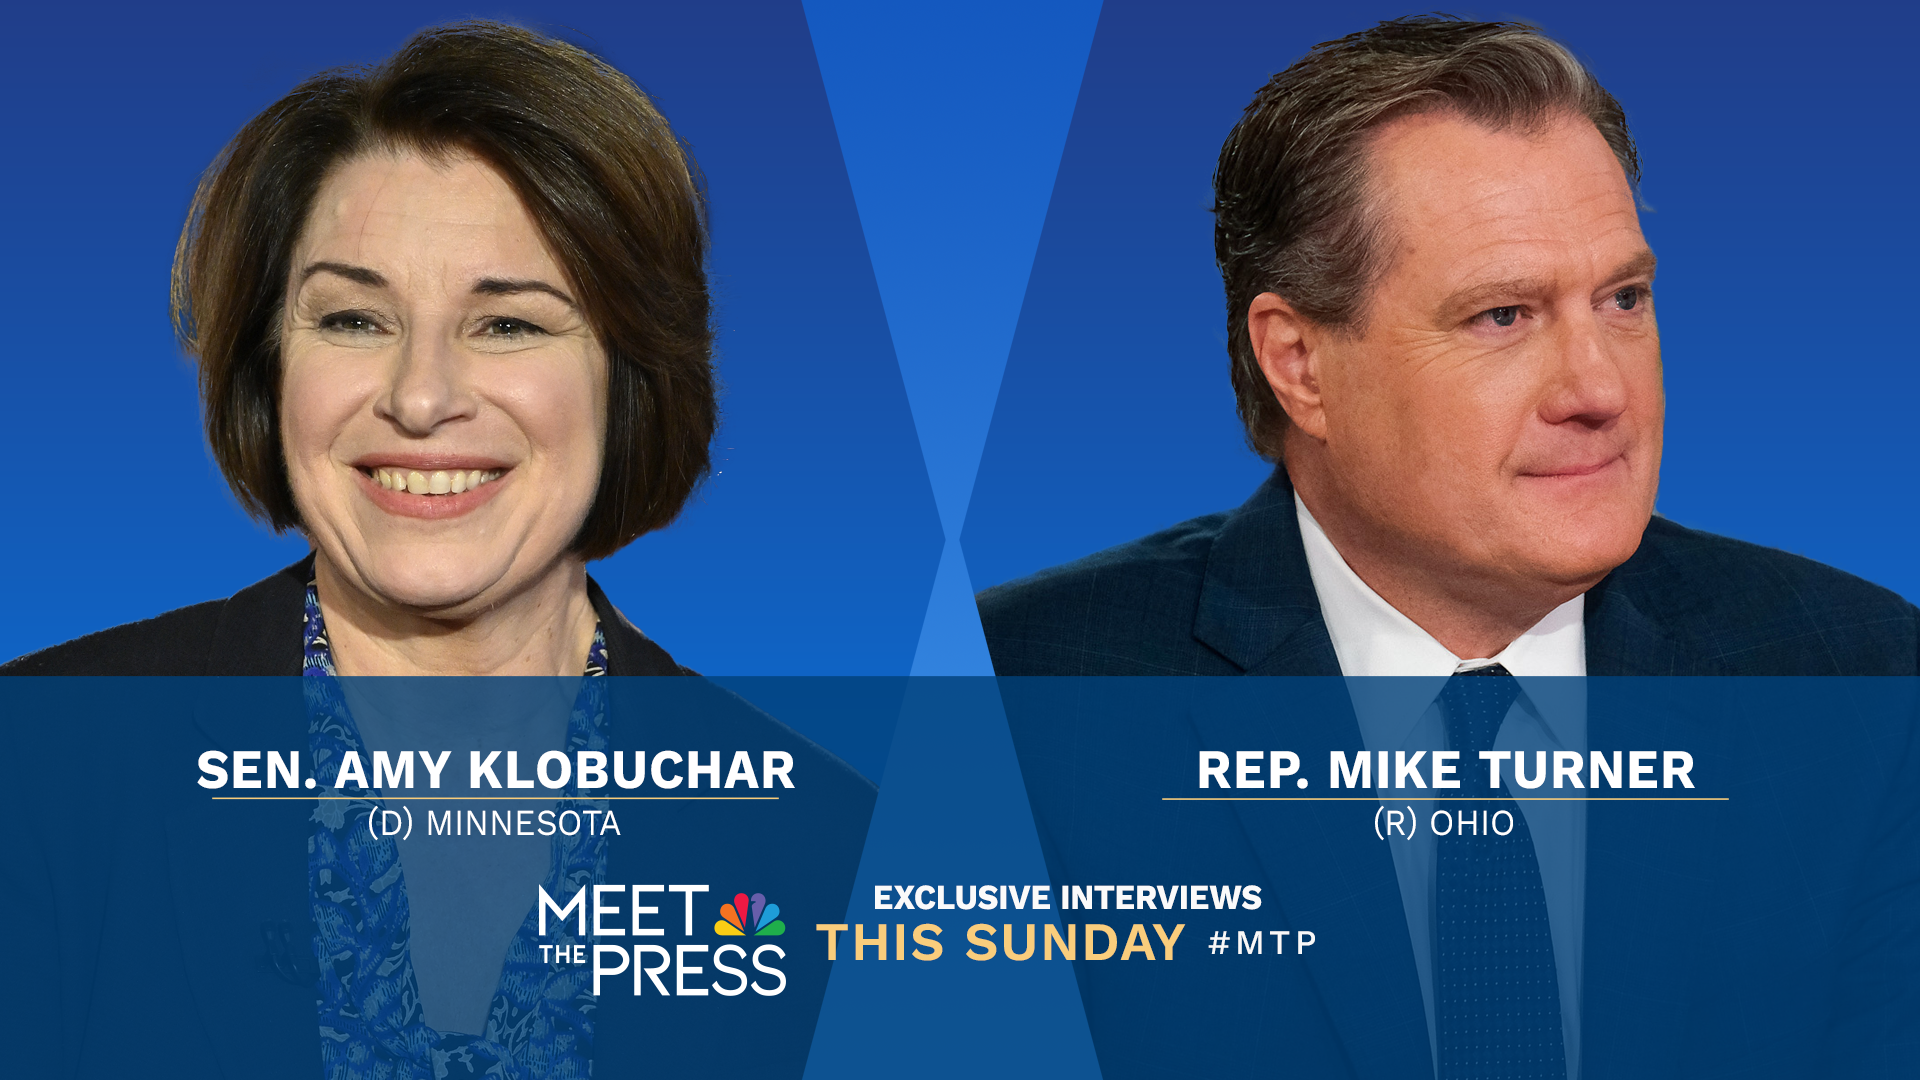 EXCLUSIVE INTERVIEWS WITH HOUSE INTEL CHAIR REP. MIKE TURNER & SEN. AMY KLOBUCHAR THIS SUNDAY ON “MEET THE PRESS WITH KRISTEN WELKER”